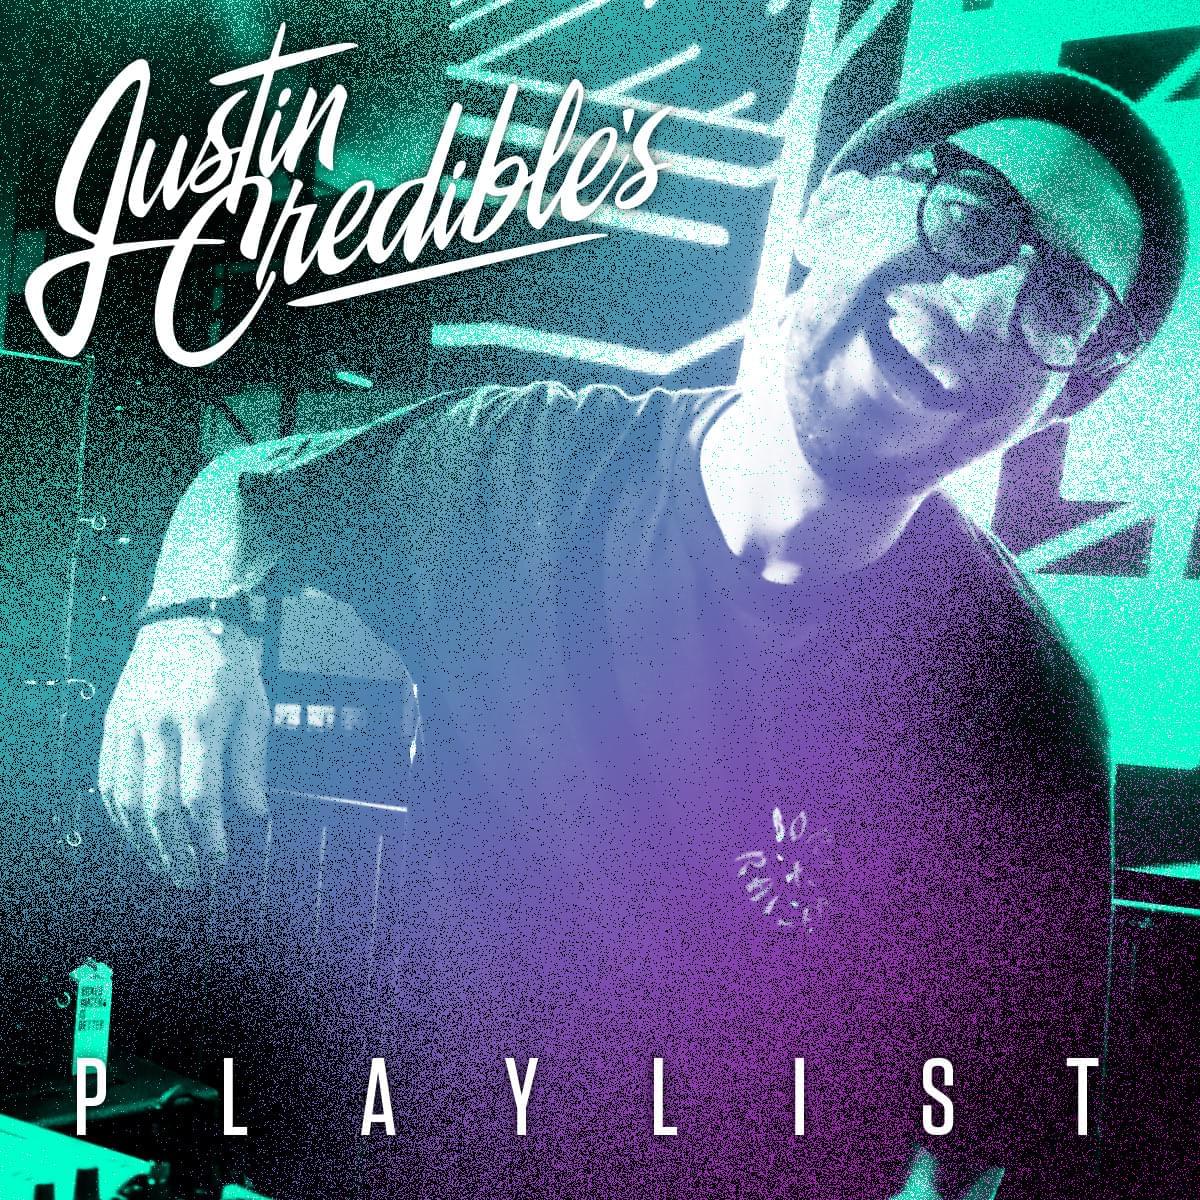 Find Out What Tracks Justin Credible Has In His Latest “Jus10 Credible” Playlist [PEEP]